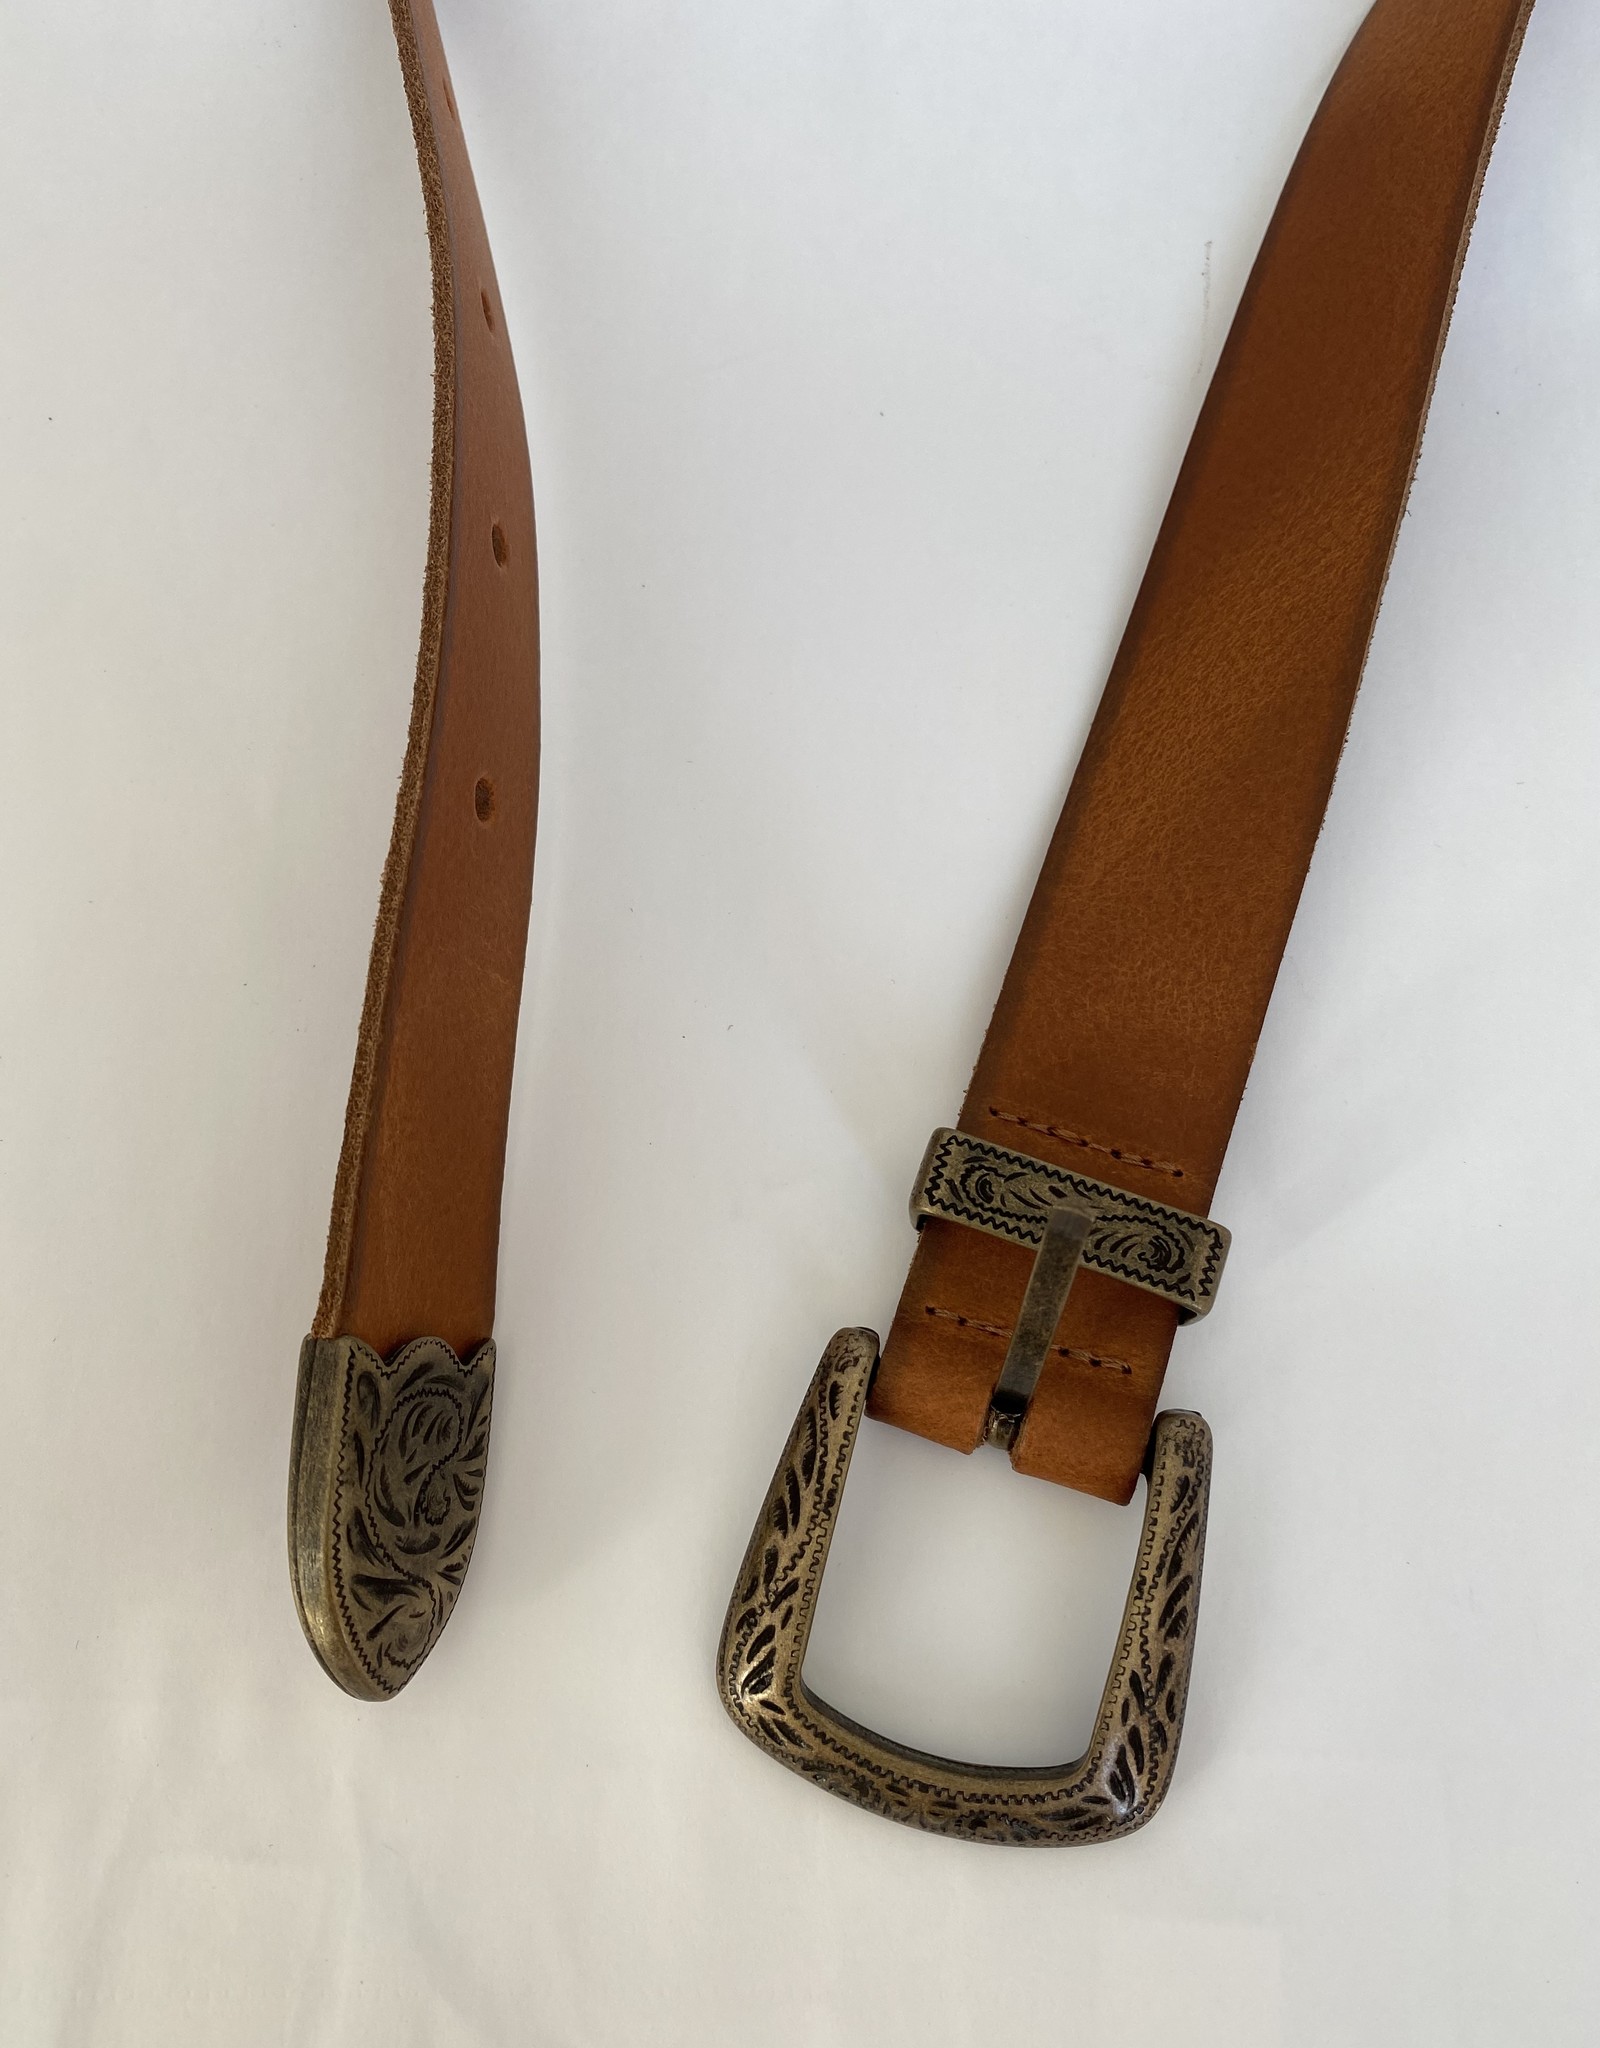 Leather belt camel in cowboy style.